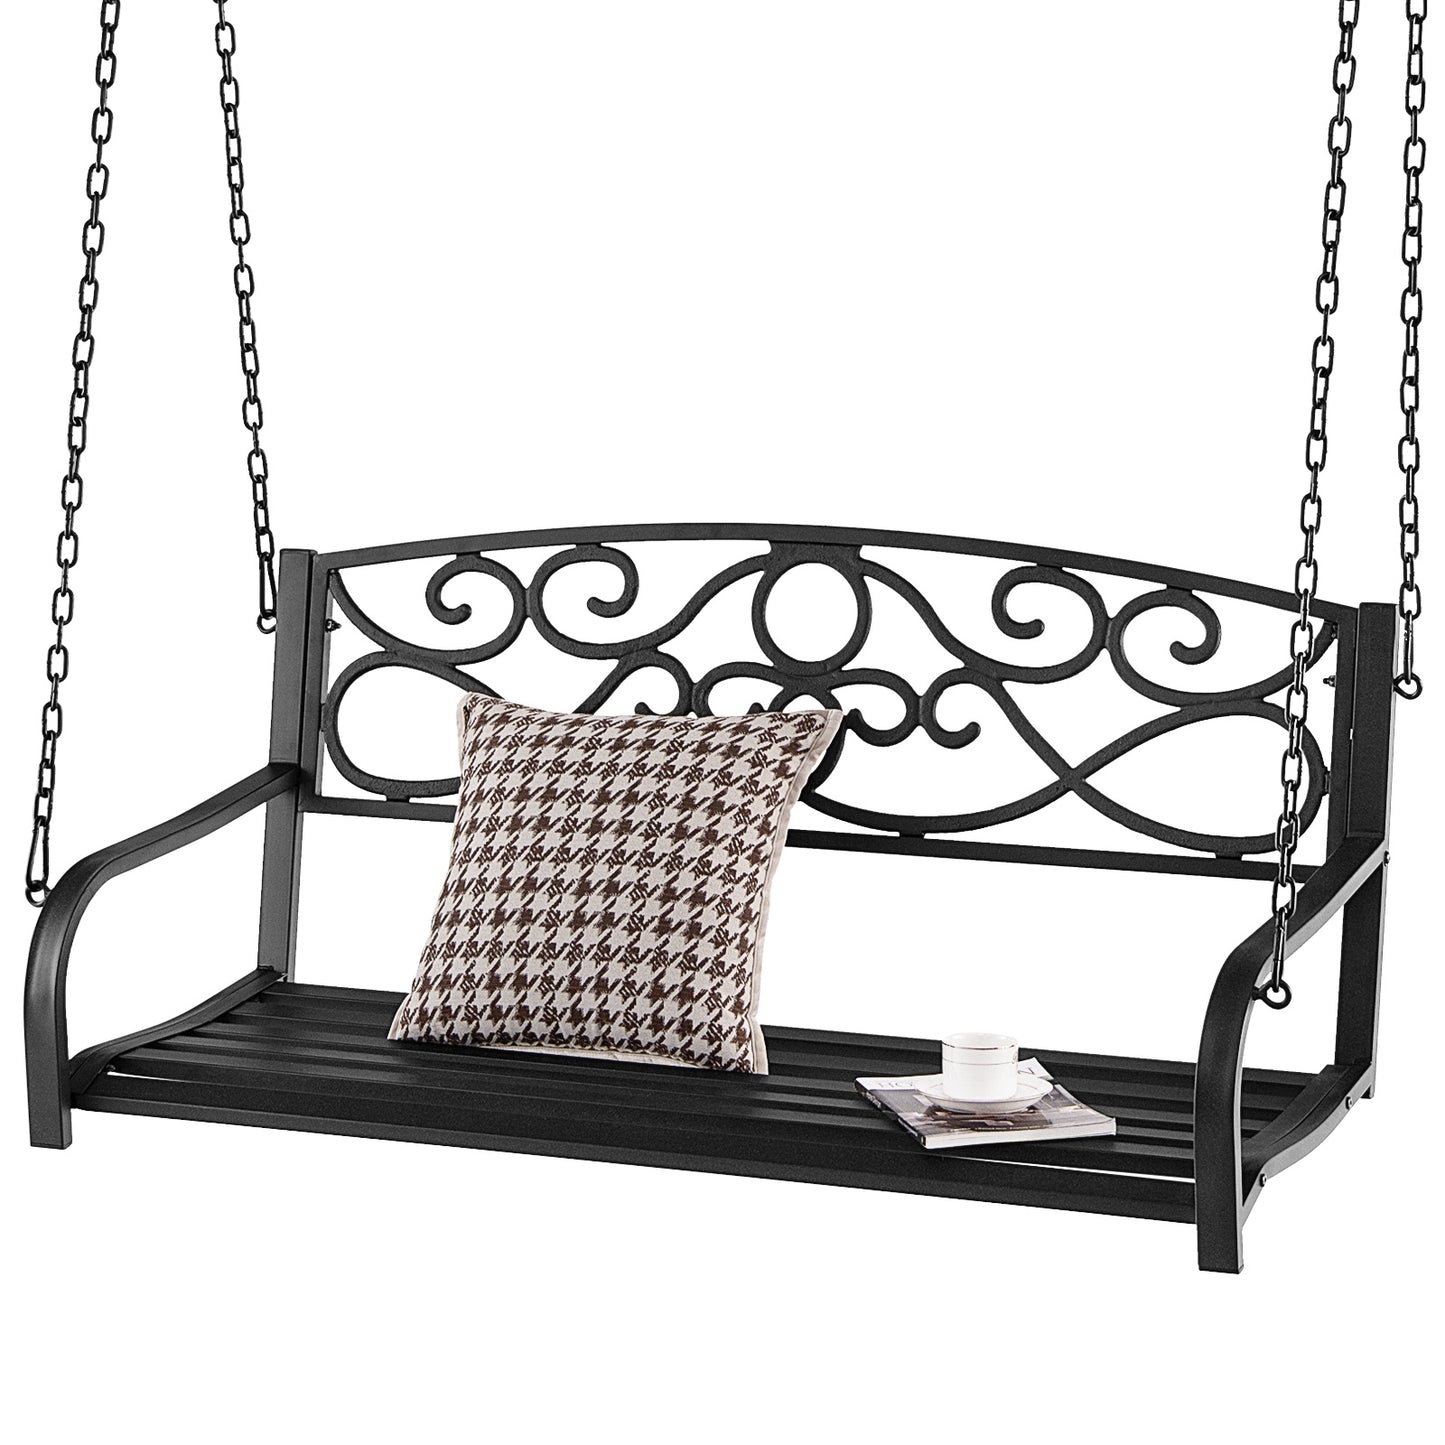 Outdoor 2-Person Metal Porch Swing Chair with Chains-Black